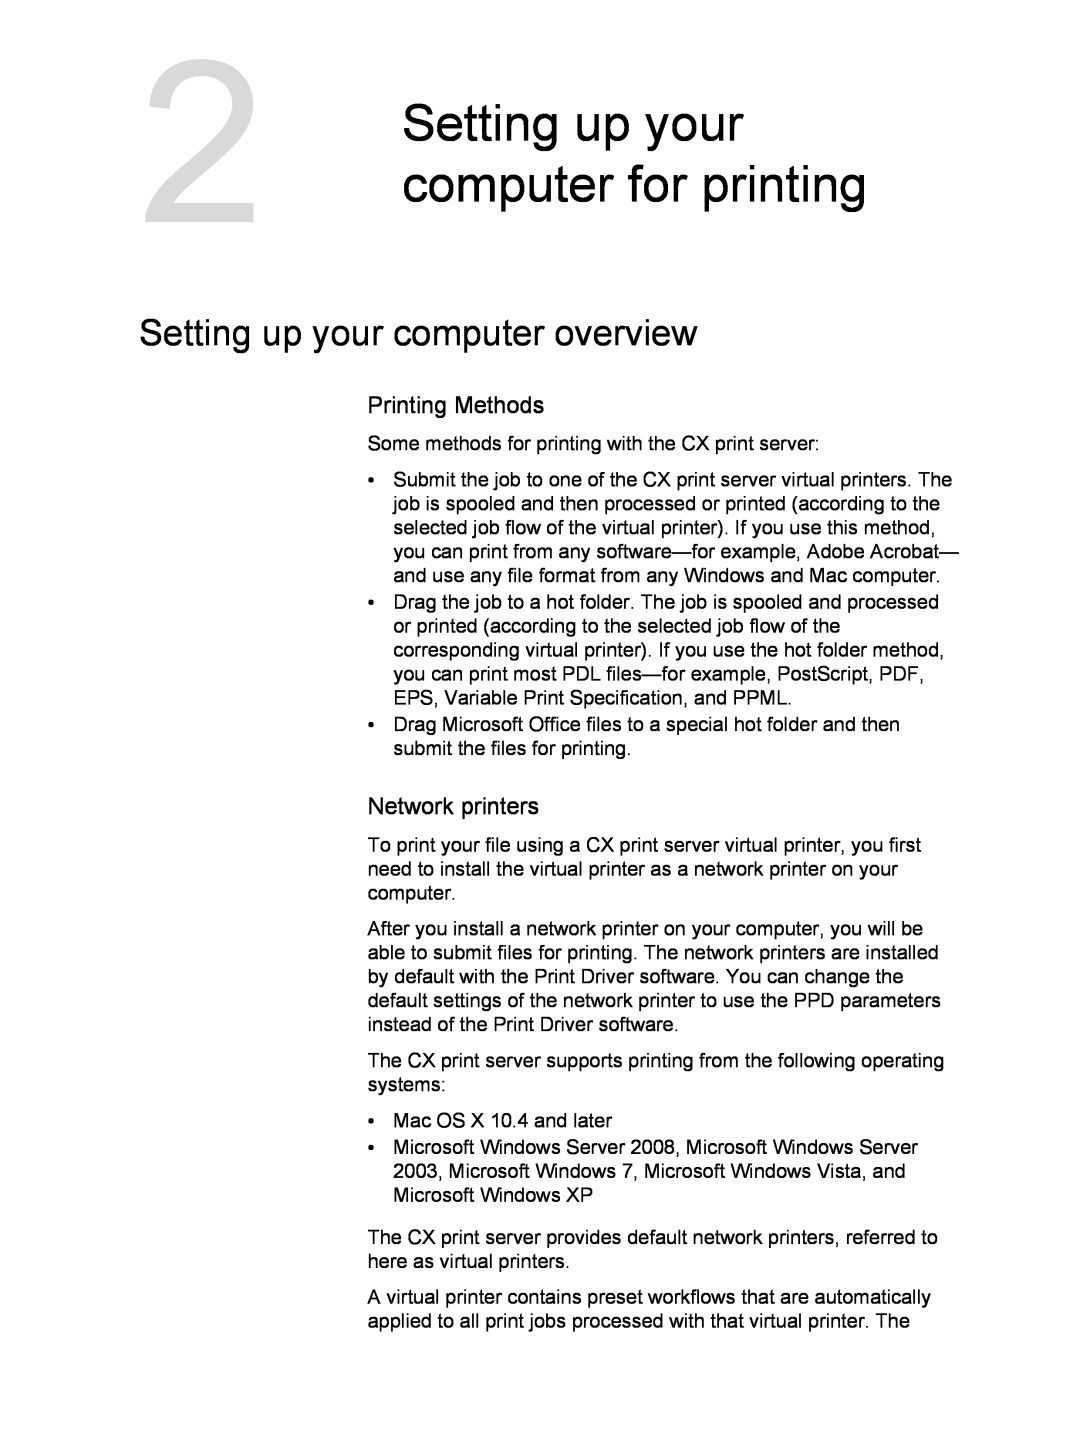 Xerox 550, 560 manual computer for printing, Setting up your computer overview, Printing Methods, Network printers 